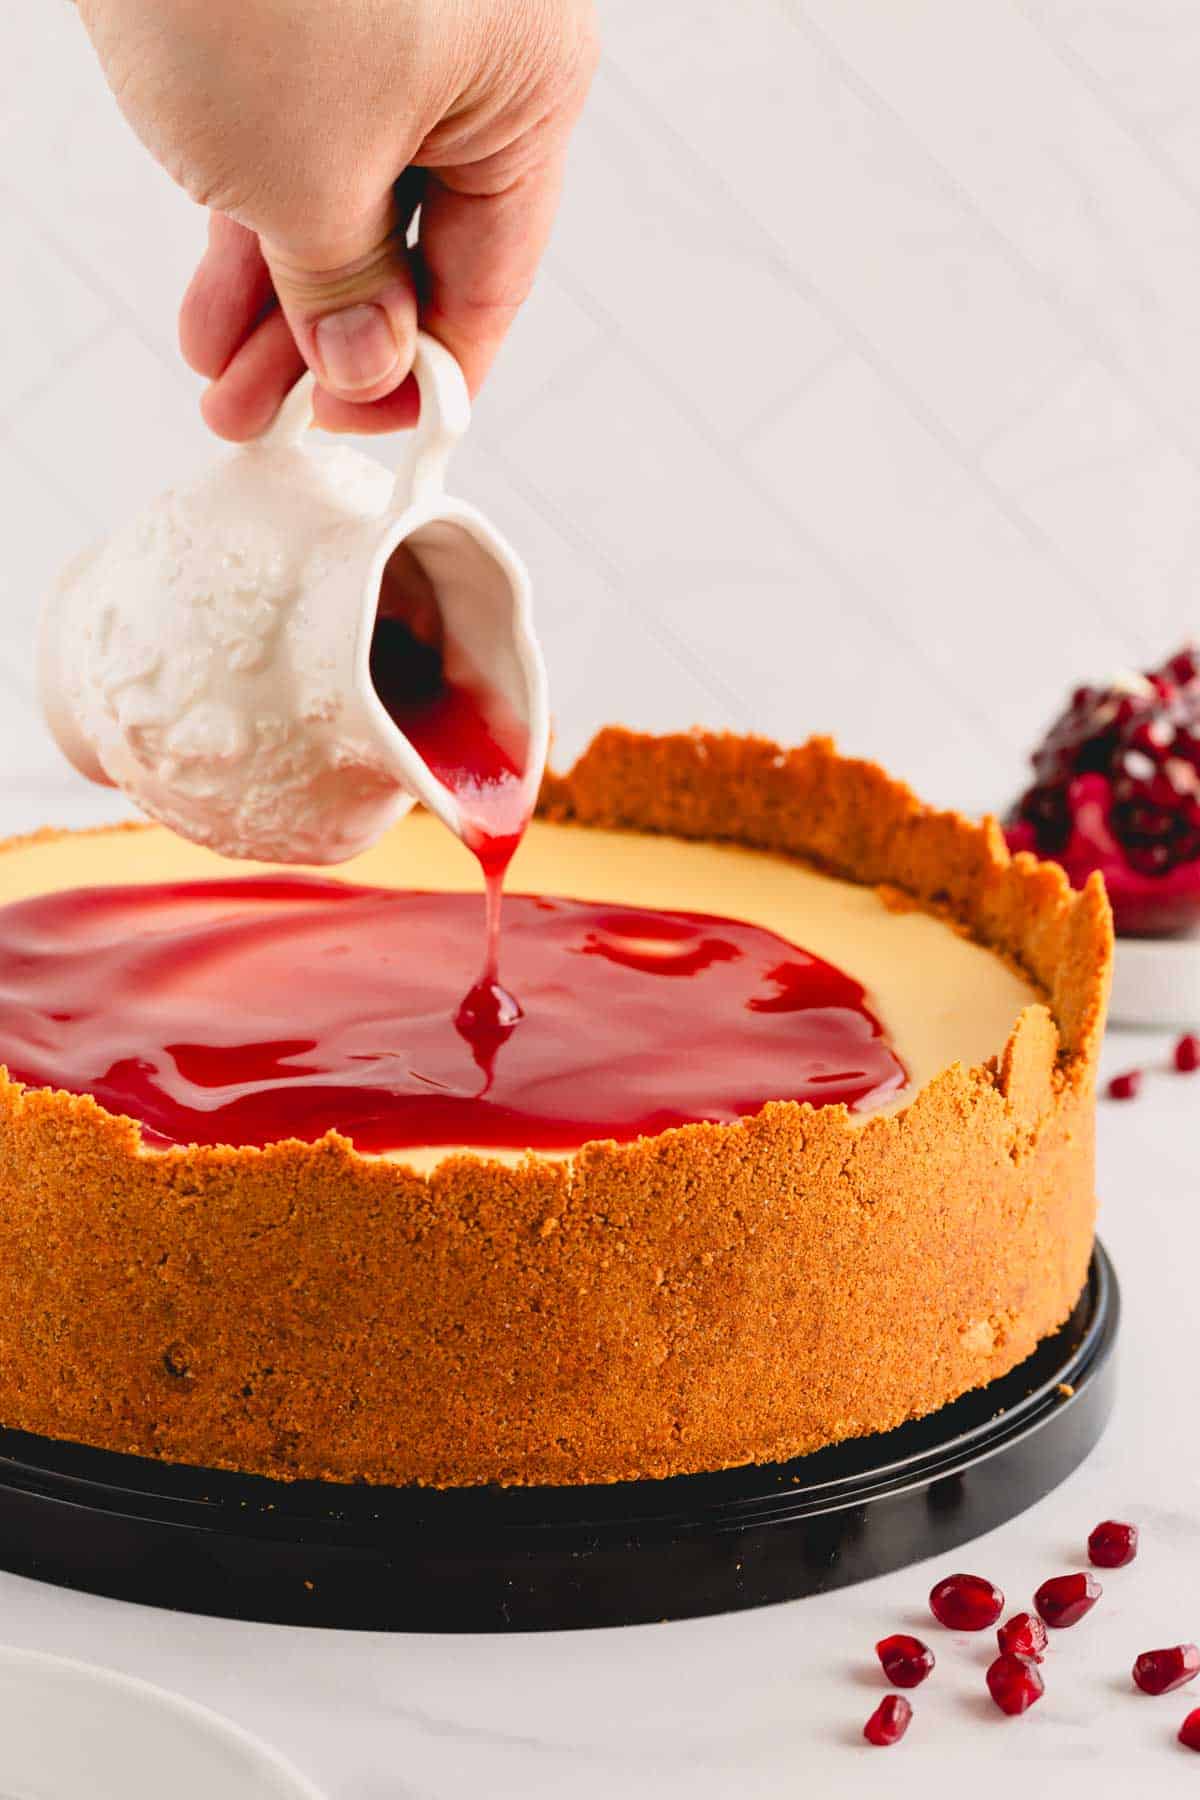 Pomegranate sauce being poured over cheesecake filling.